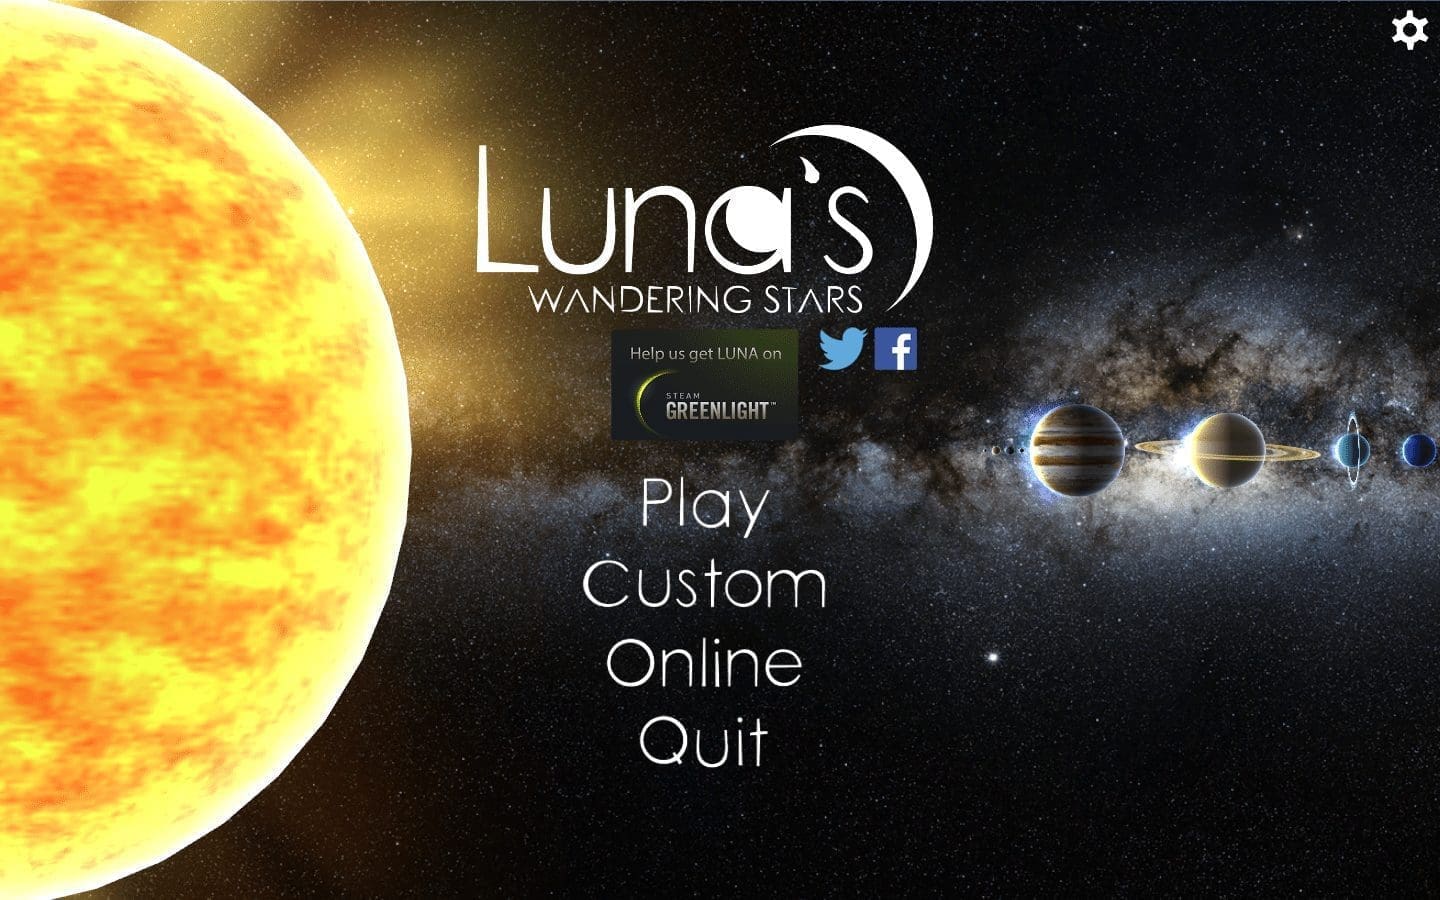 Luna's Wandering Stars by Serenity Forge